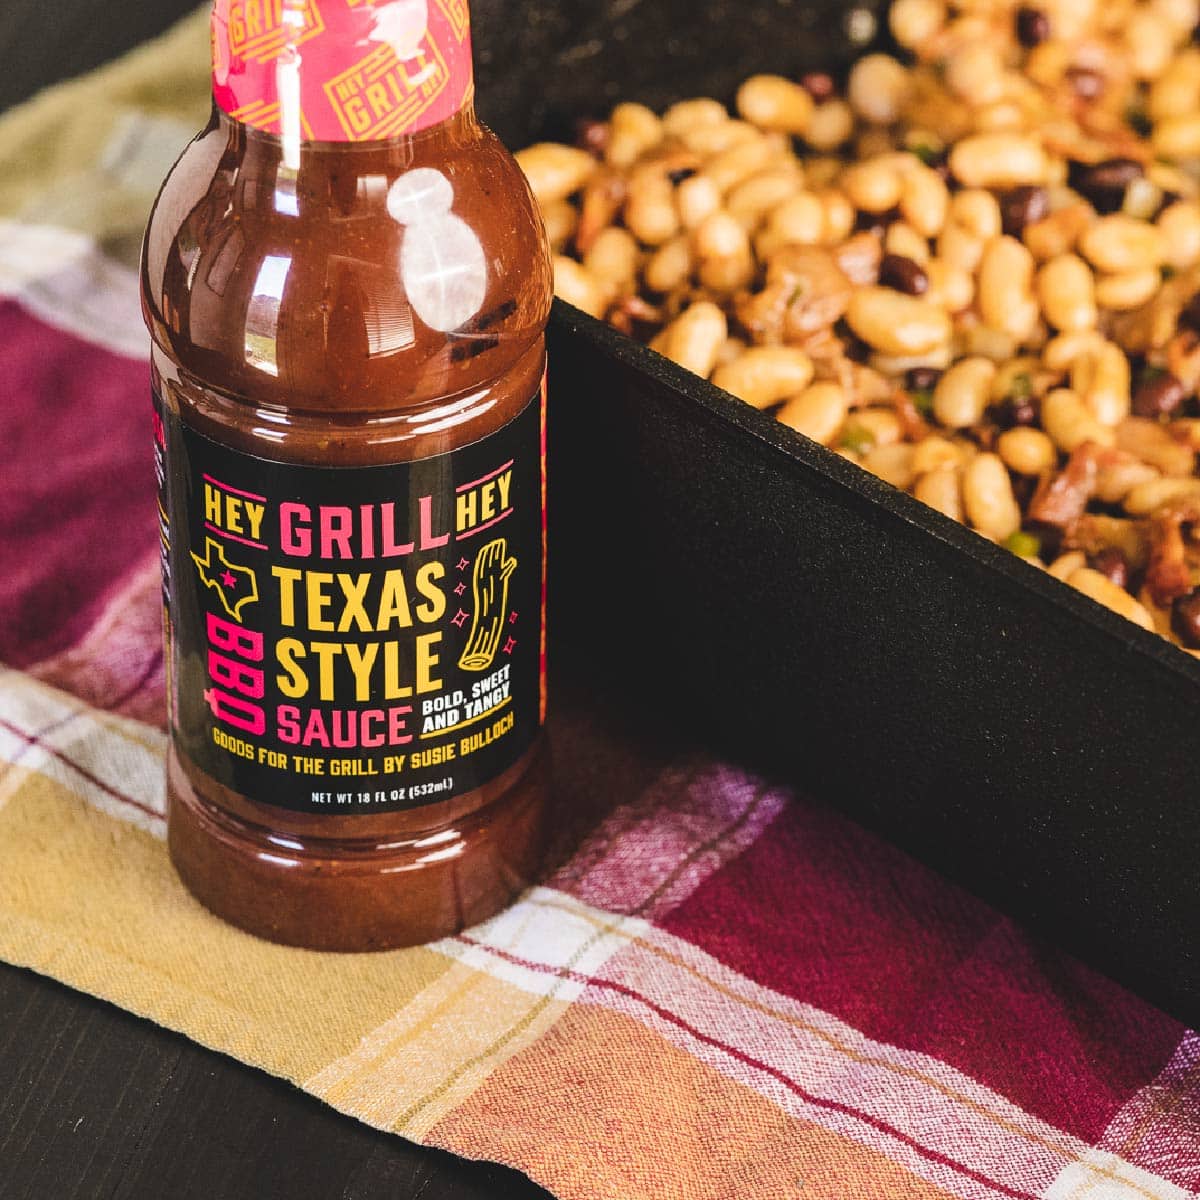 Texas Style BBQ Sauce next to tray of baked beans on table.